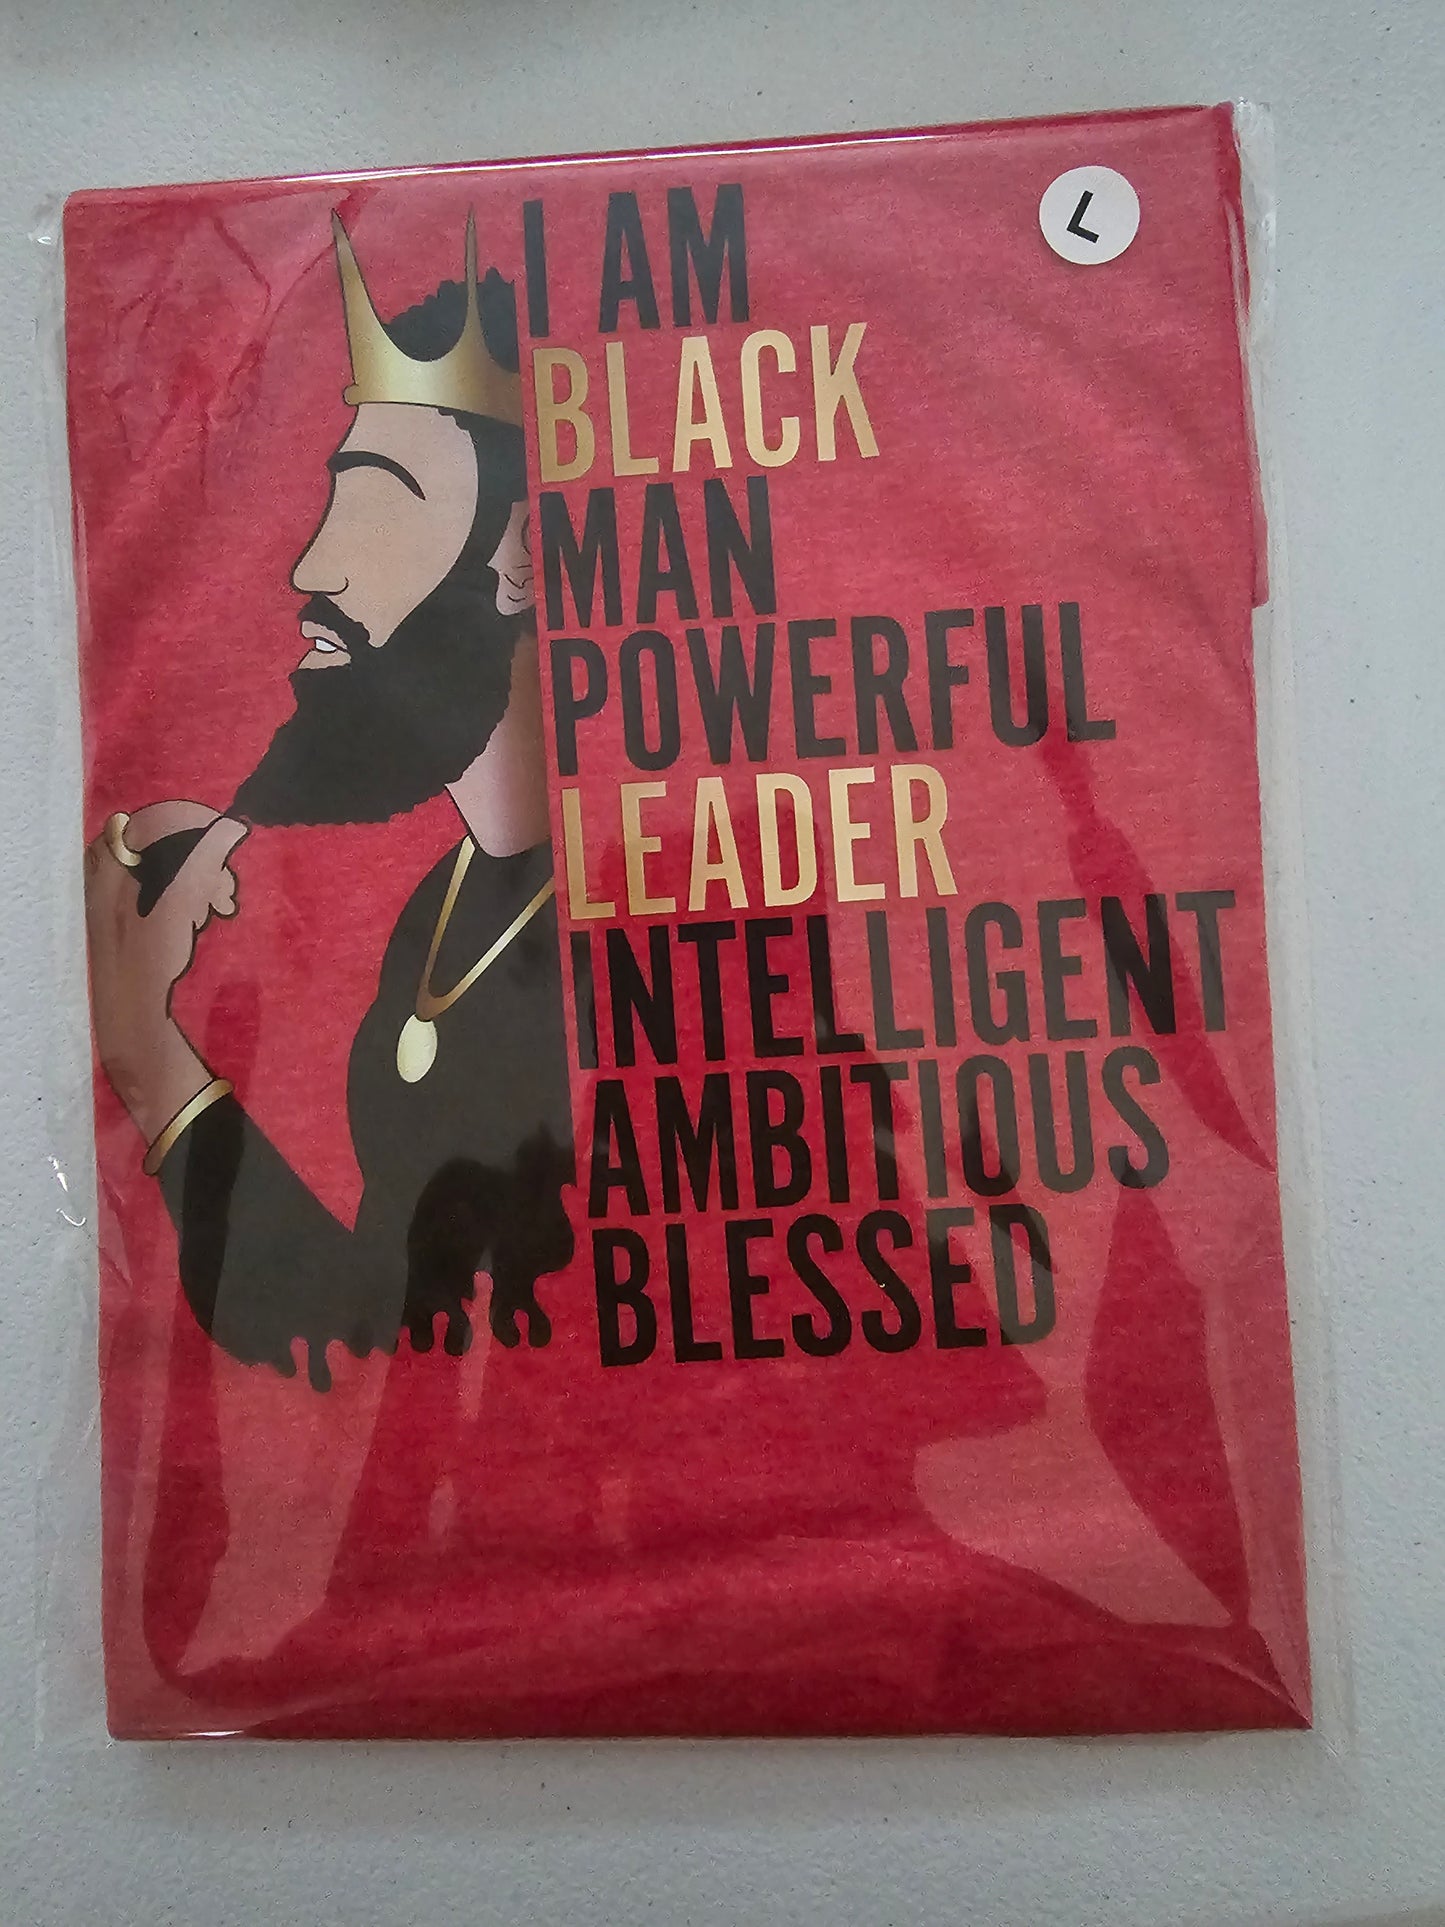 I A'm Black Man Powerful Leader Intelligent Ambitious Blessed Handmade Graphic T- Shirt